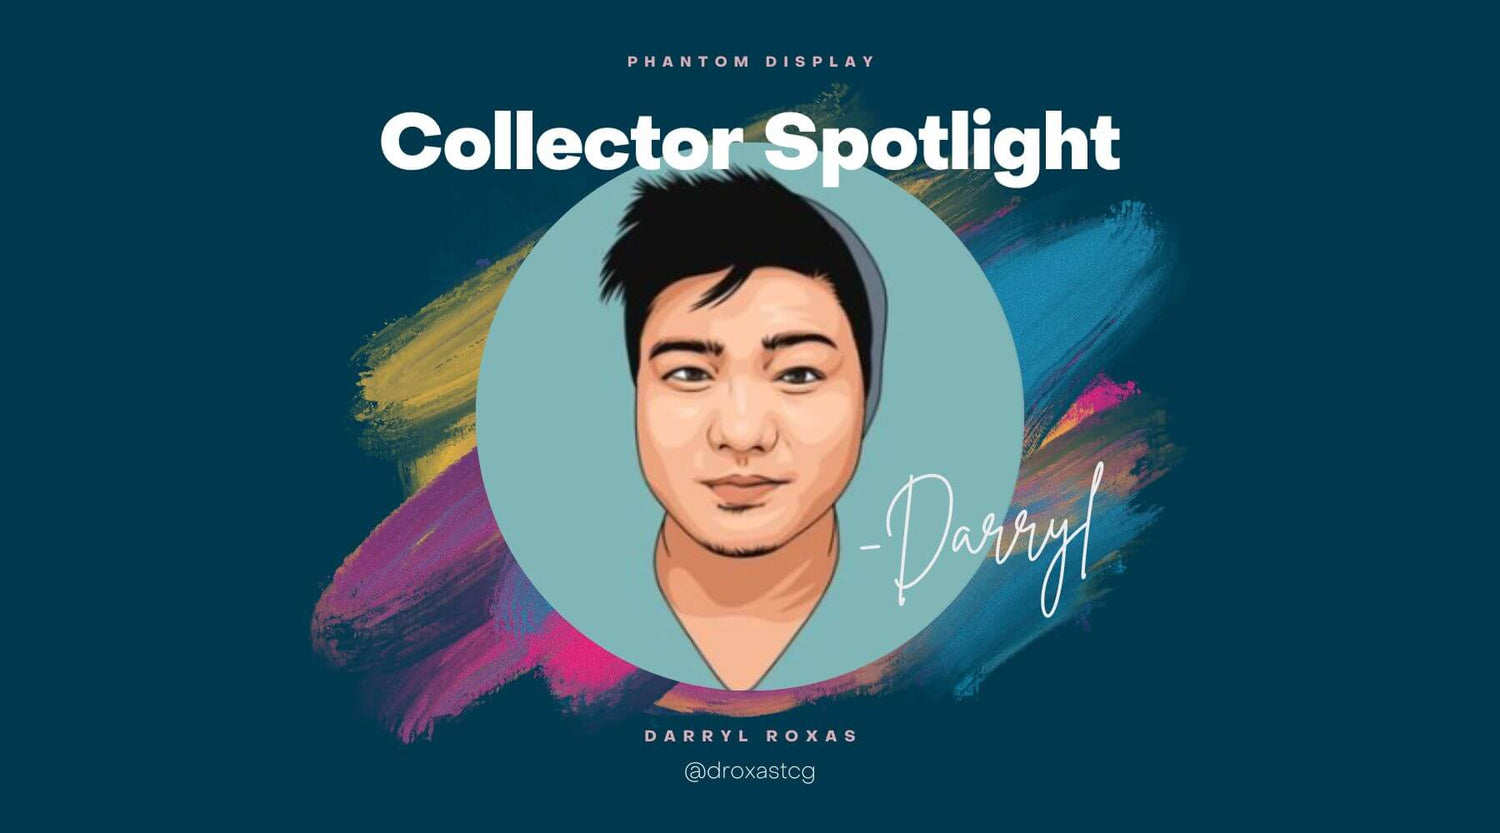 Collector Spotlight Darryl Roxas on Celebrating the Thrills of Collecting